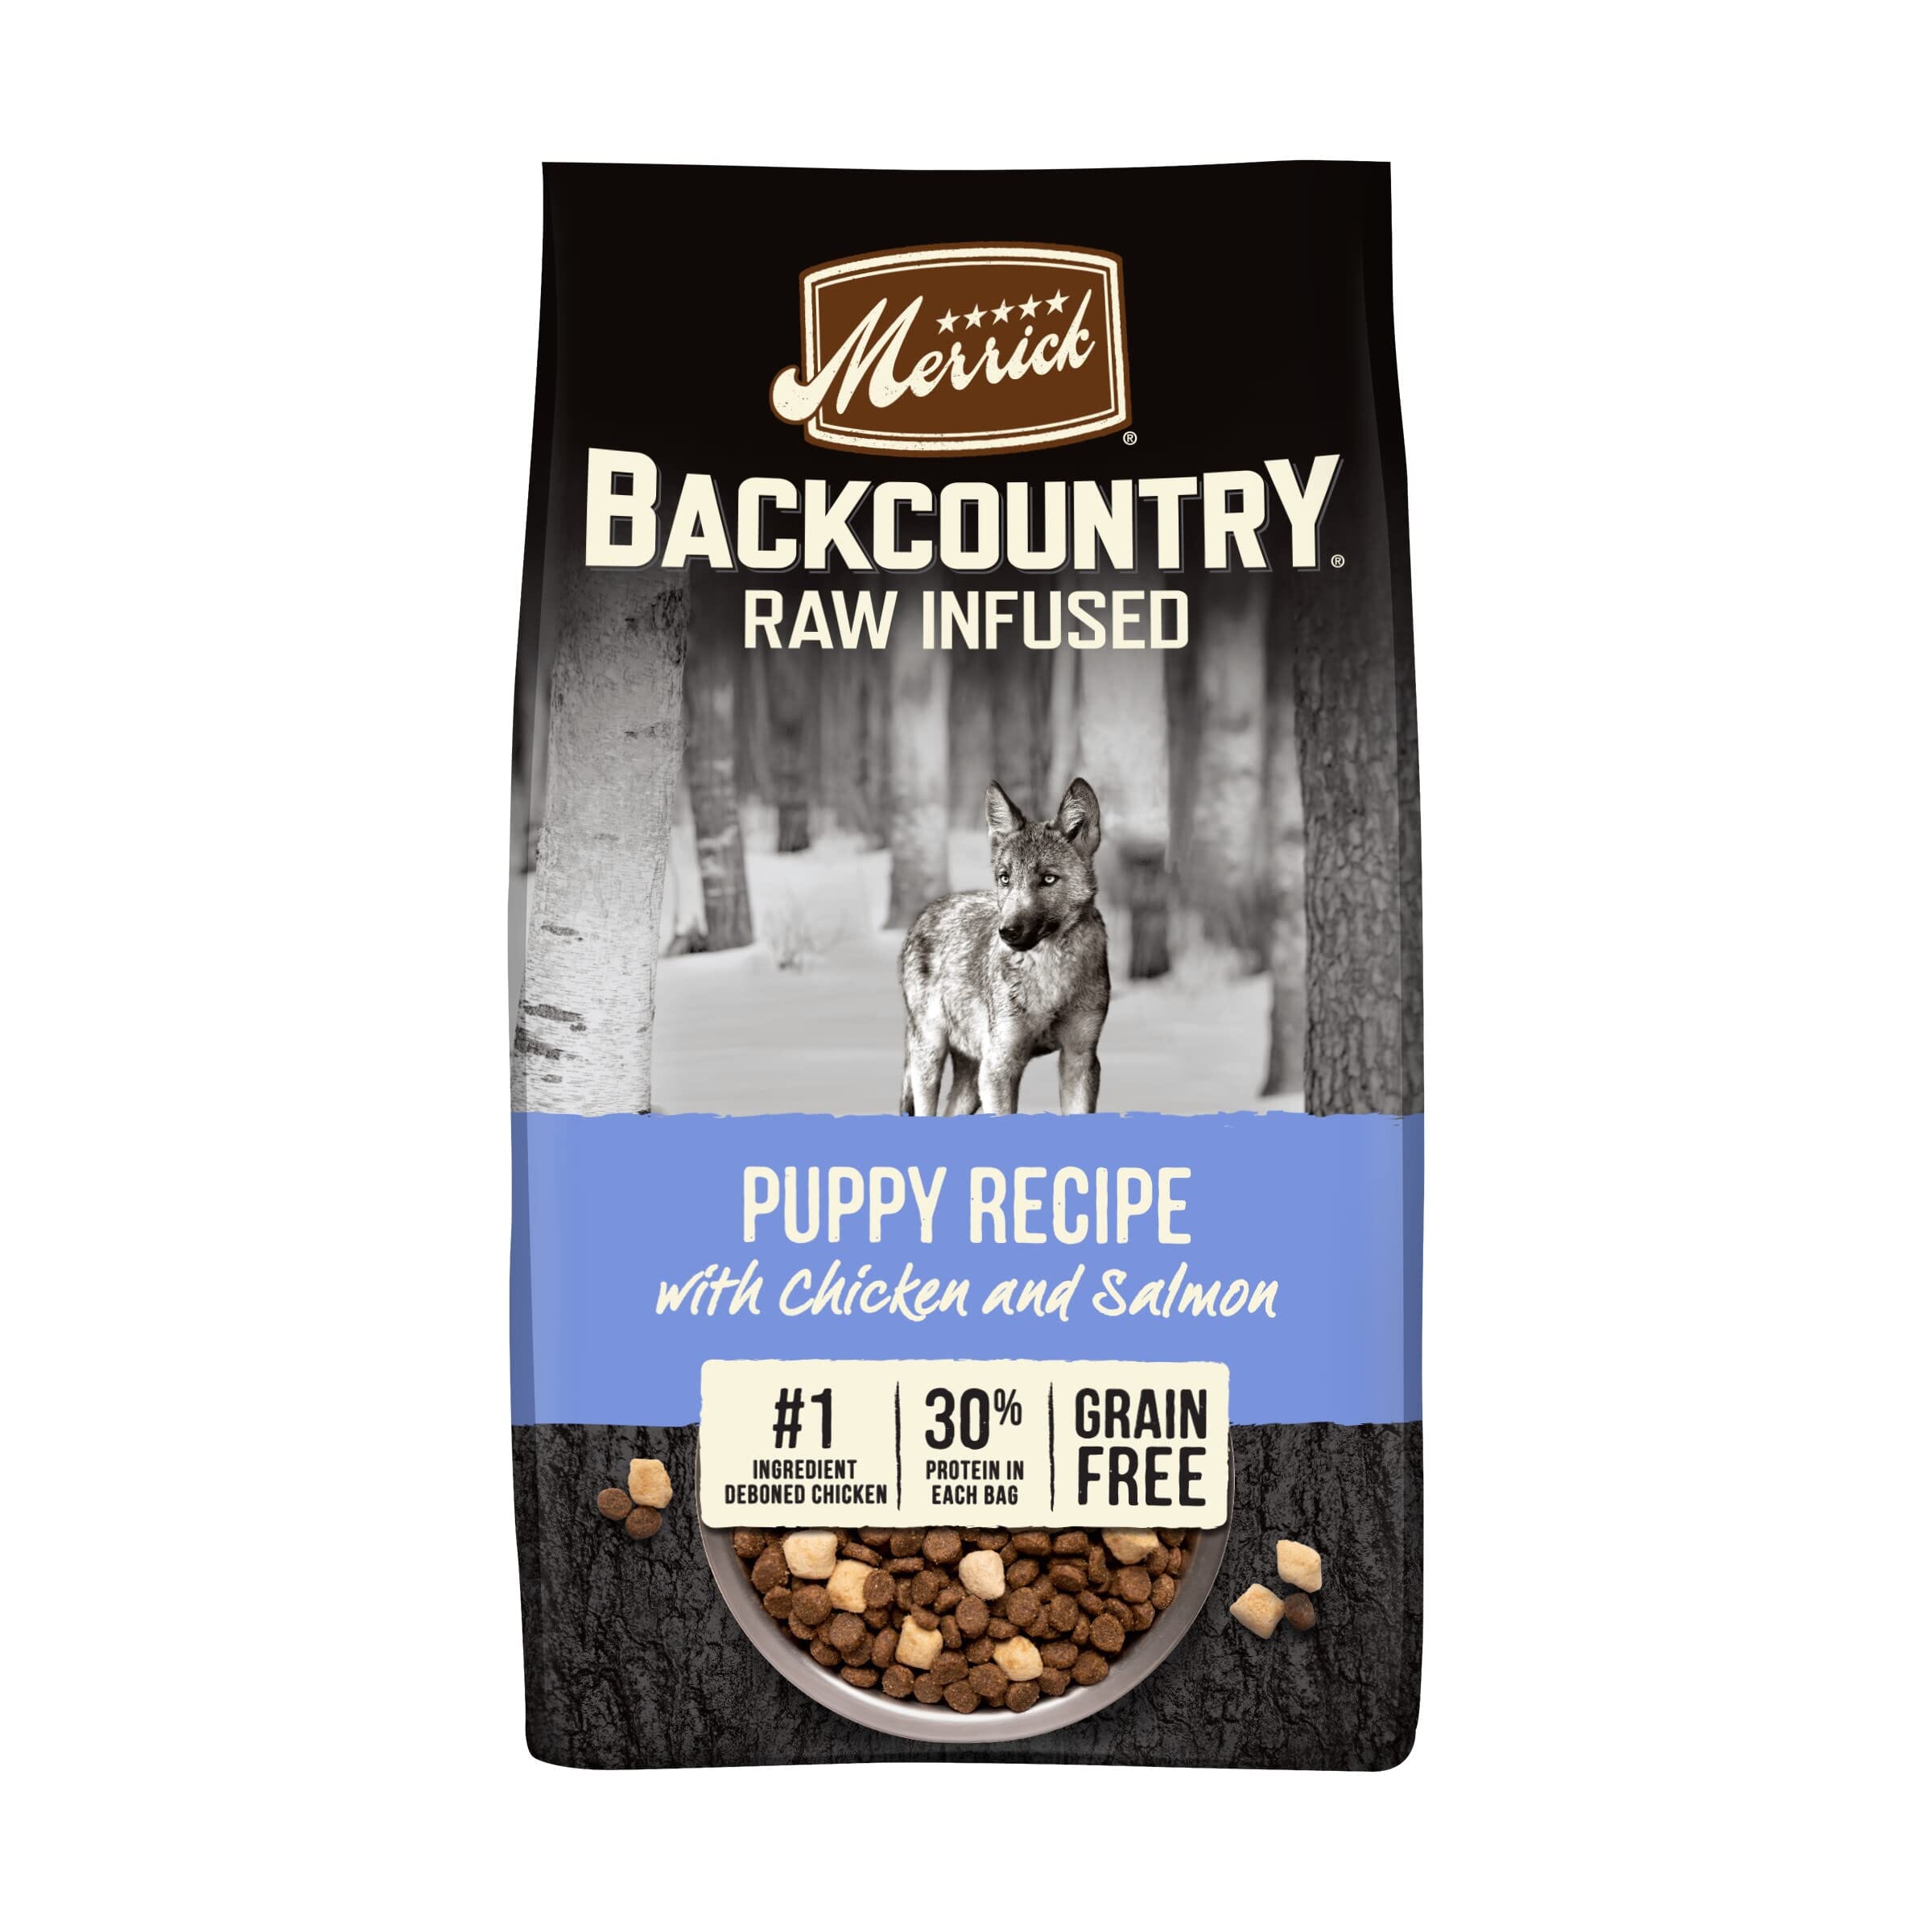 Merrick Backcountry Puppy Grain-Free Raw-Infused Chicken and Salmon Freeze-Dried Dog Food - 10 Lbs  